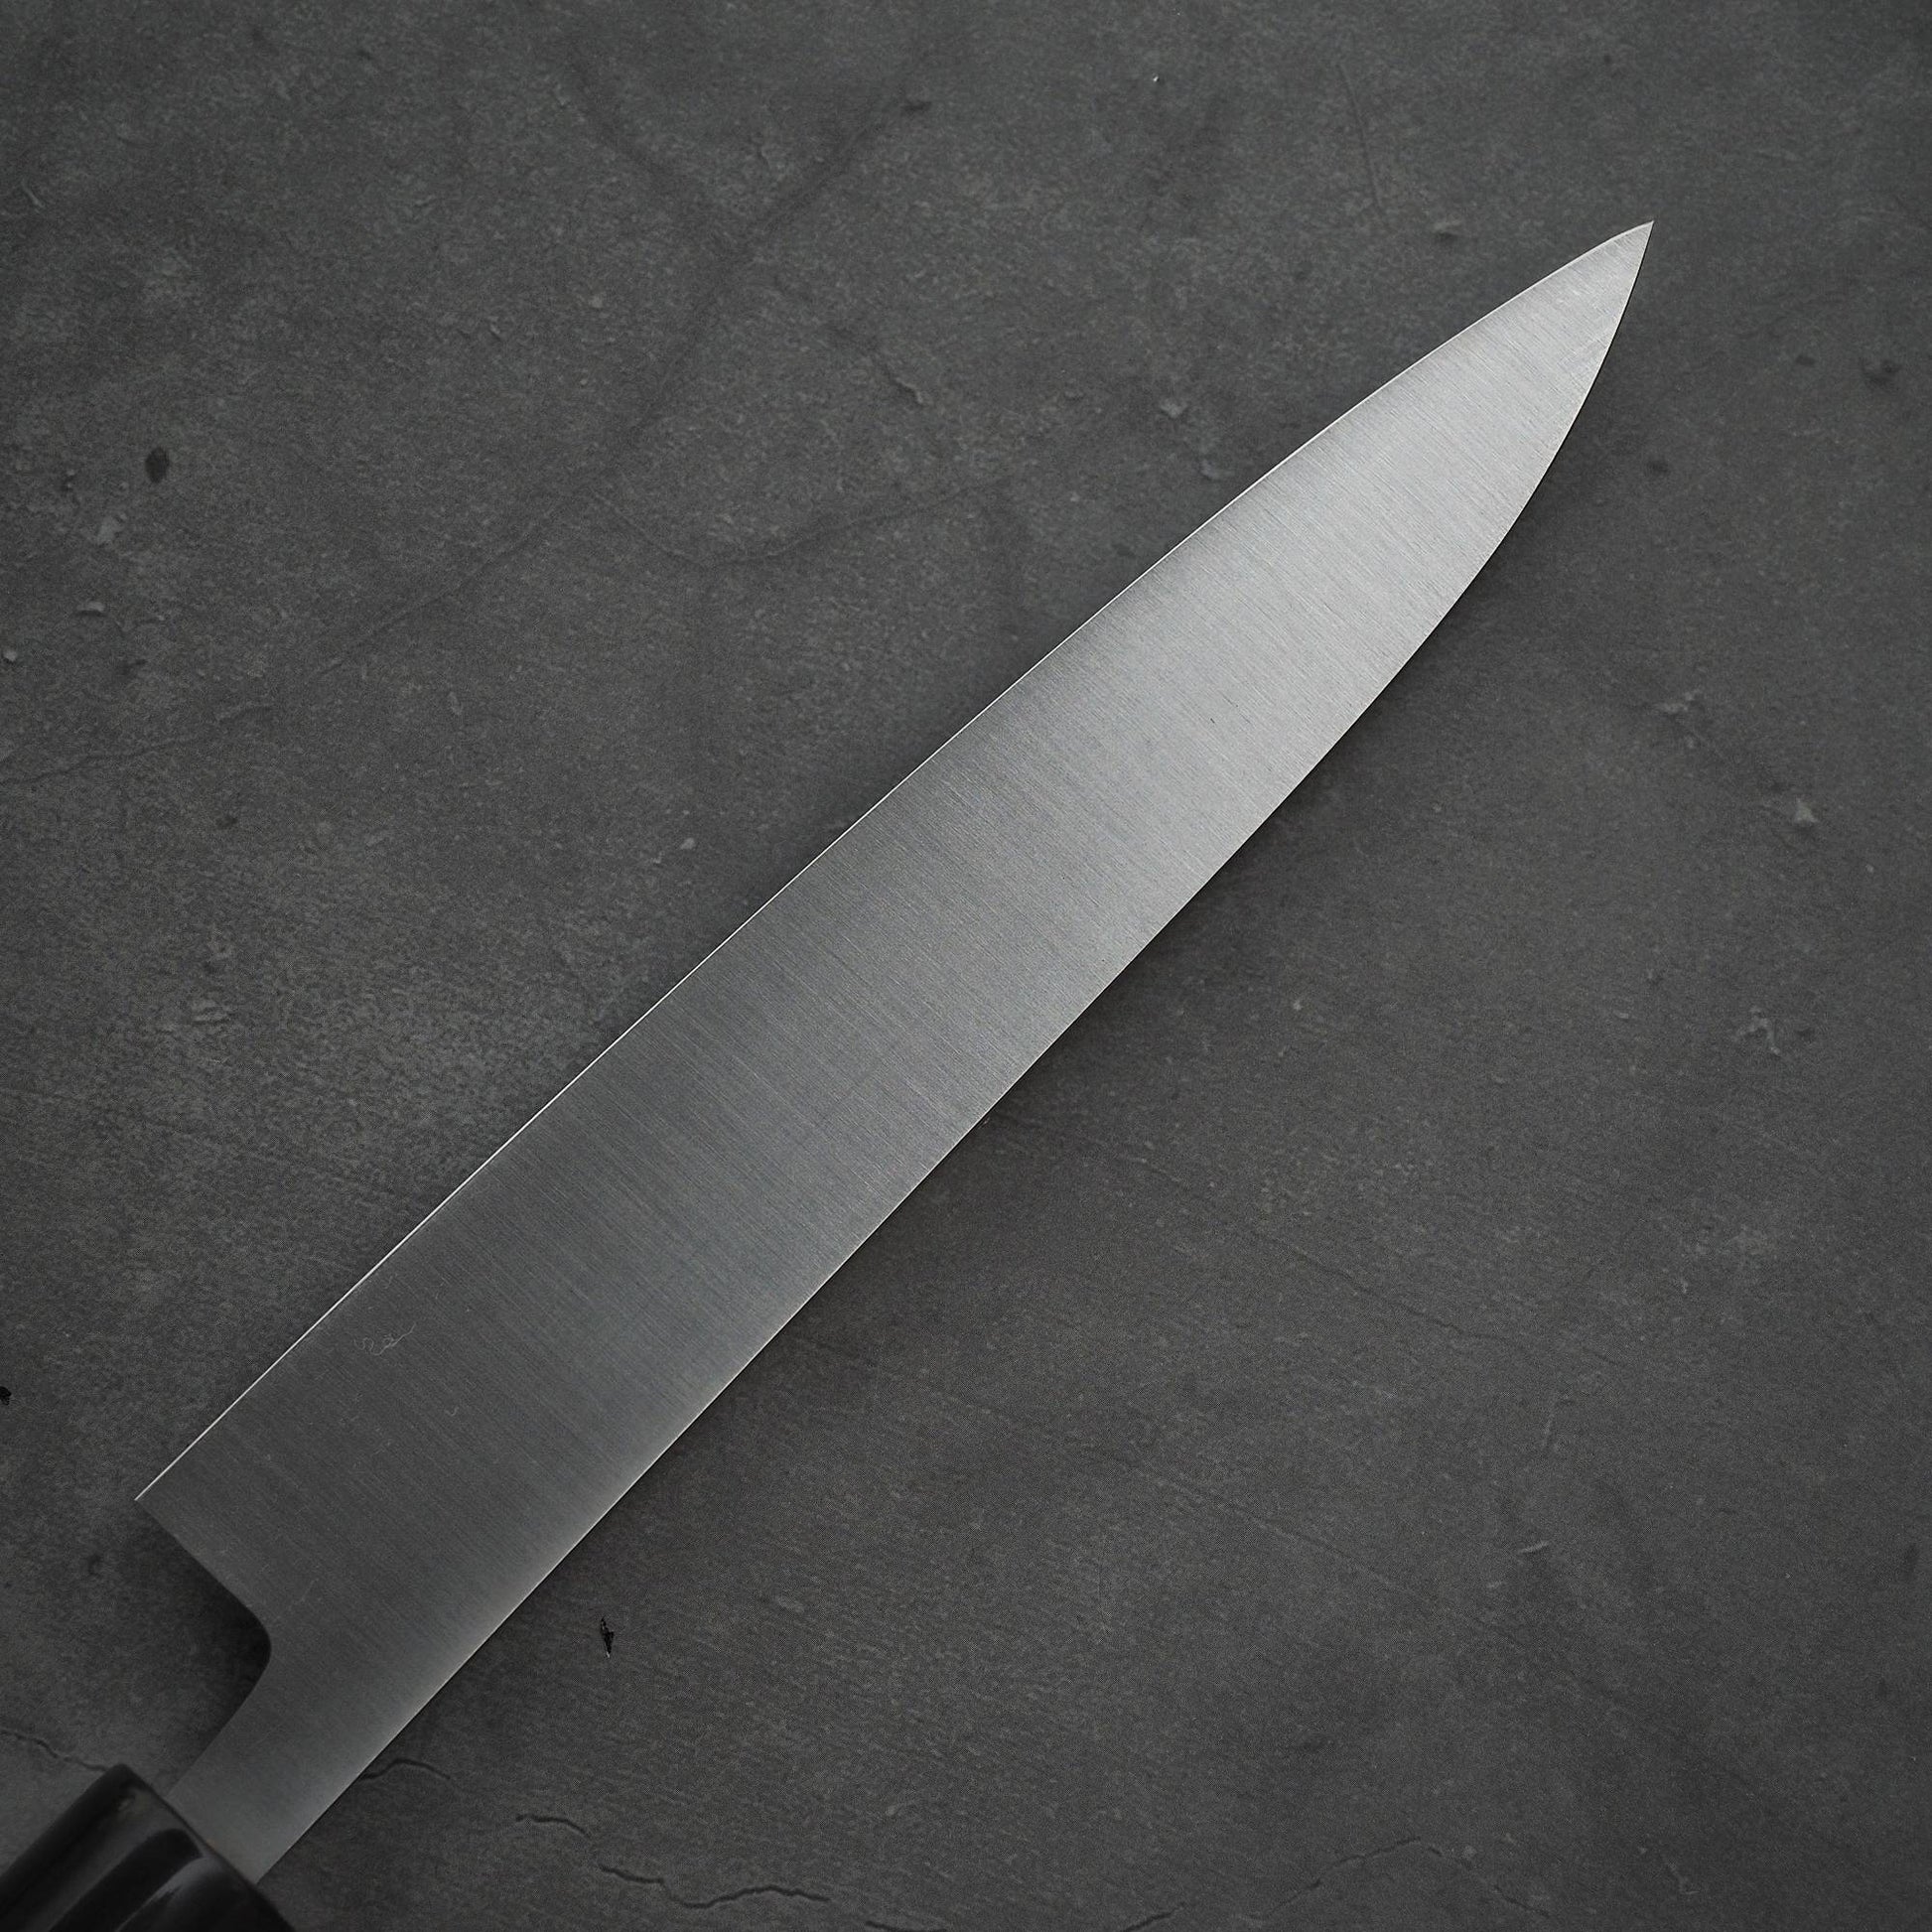 Close up view of the blade of Masamoto KS shirogami#2 petty knife. Image shows the left side